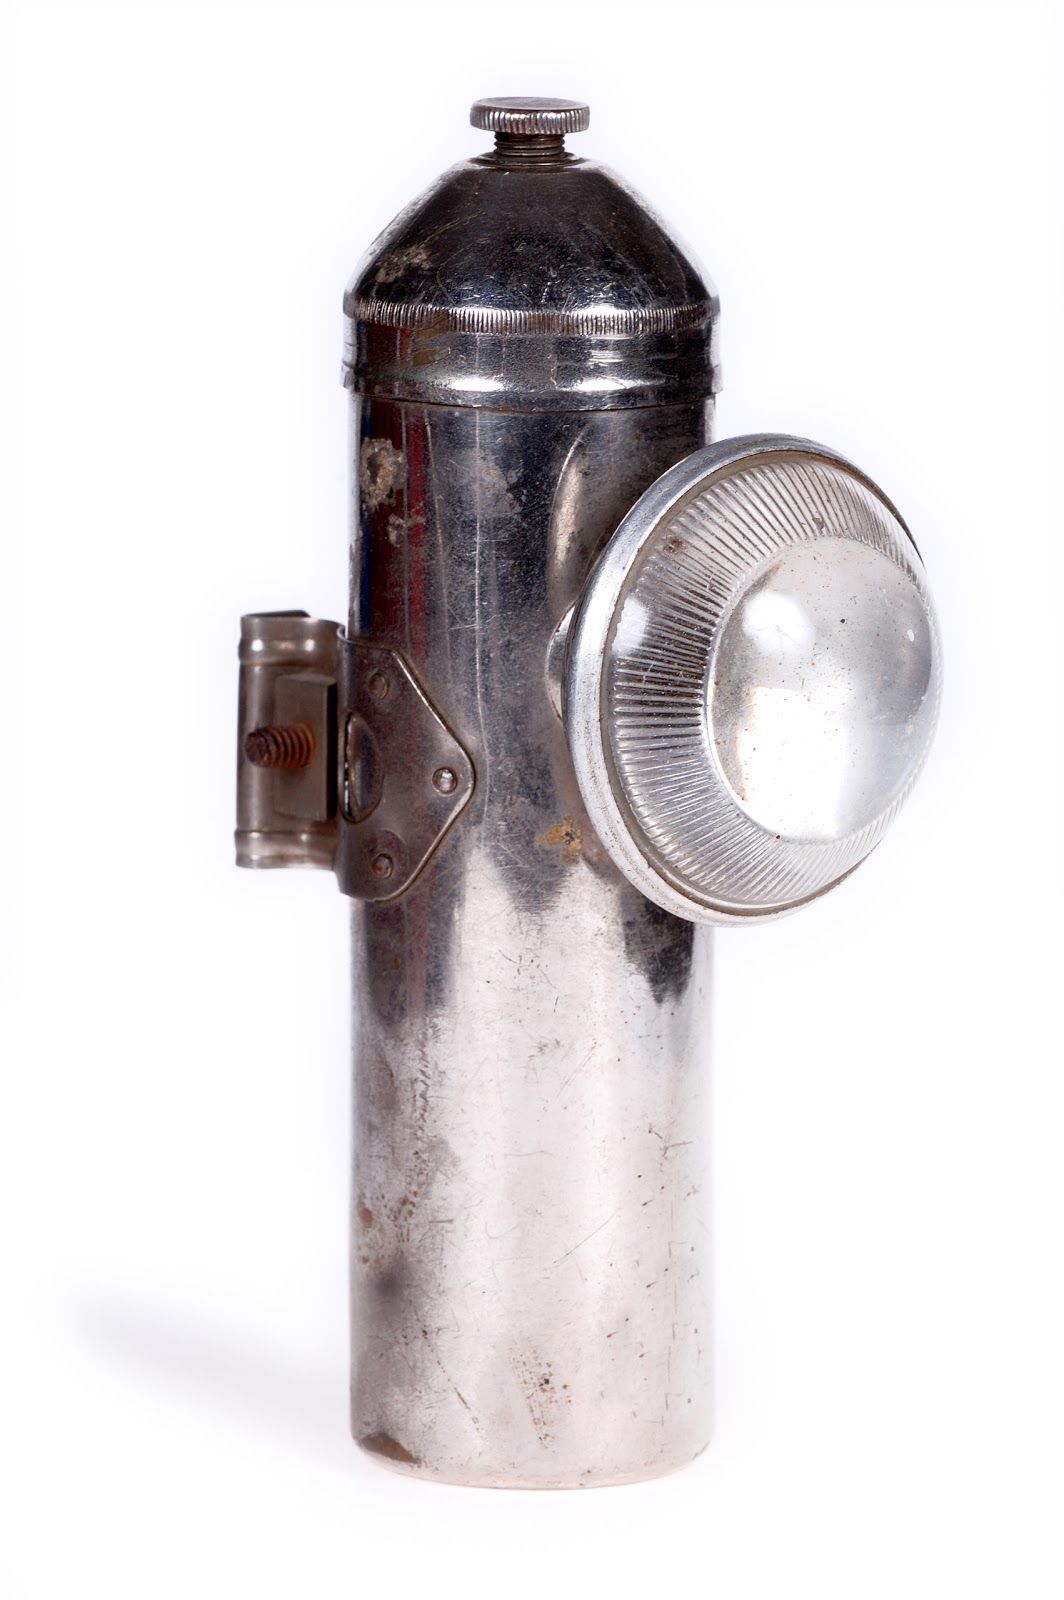 Shining a Light on the 19th Century: The History of Flashlights